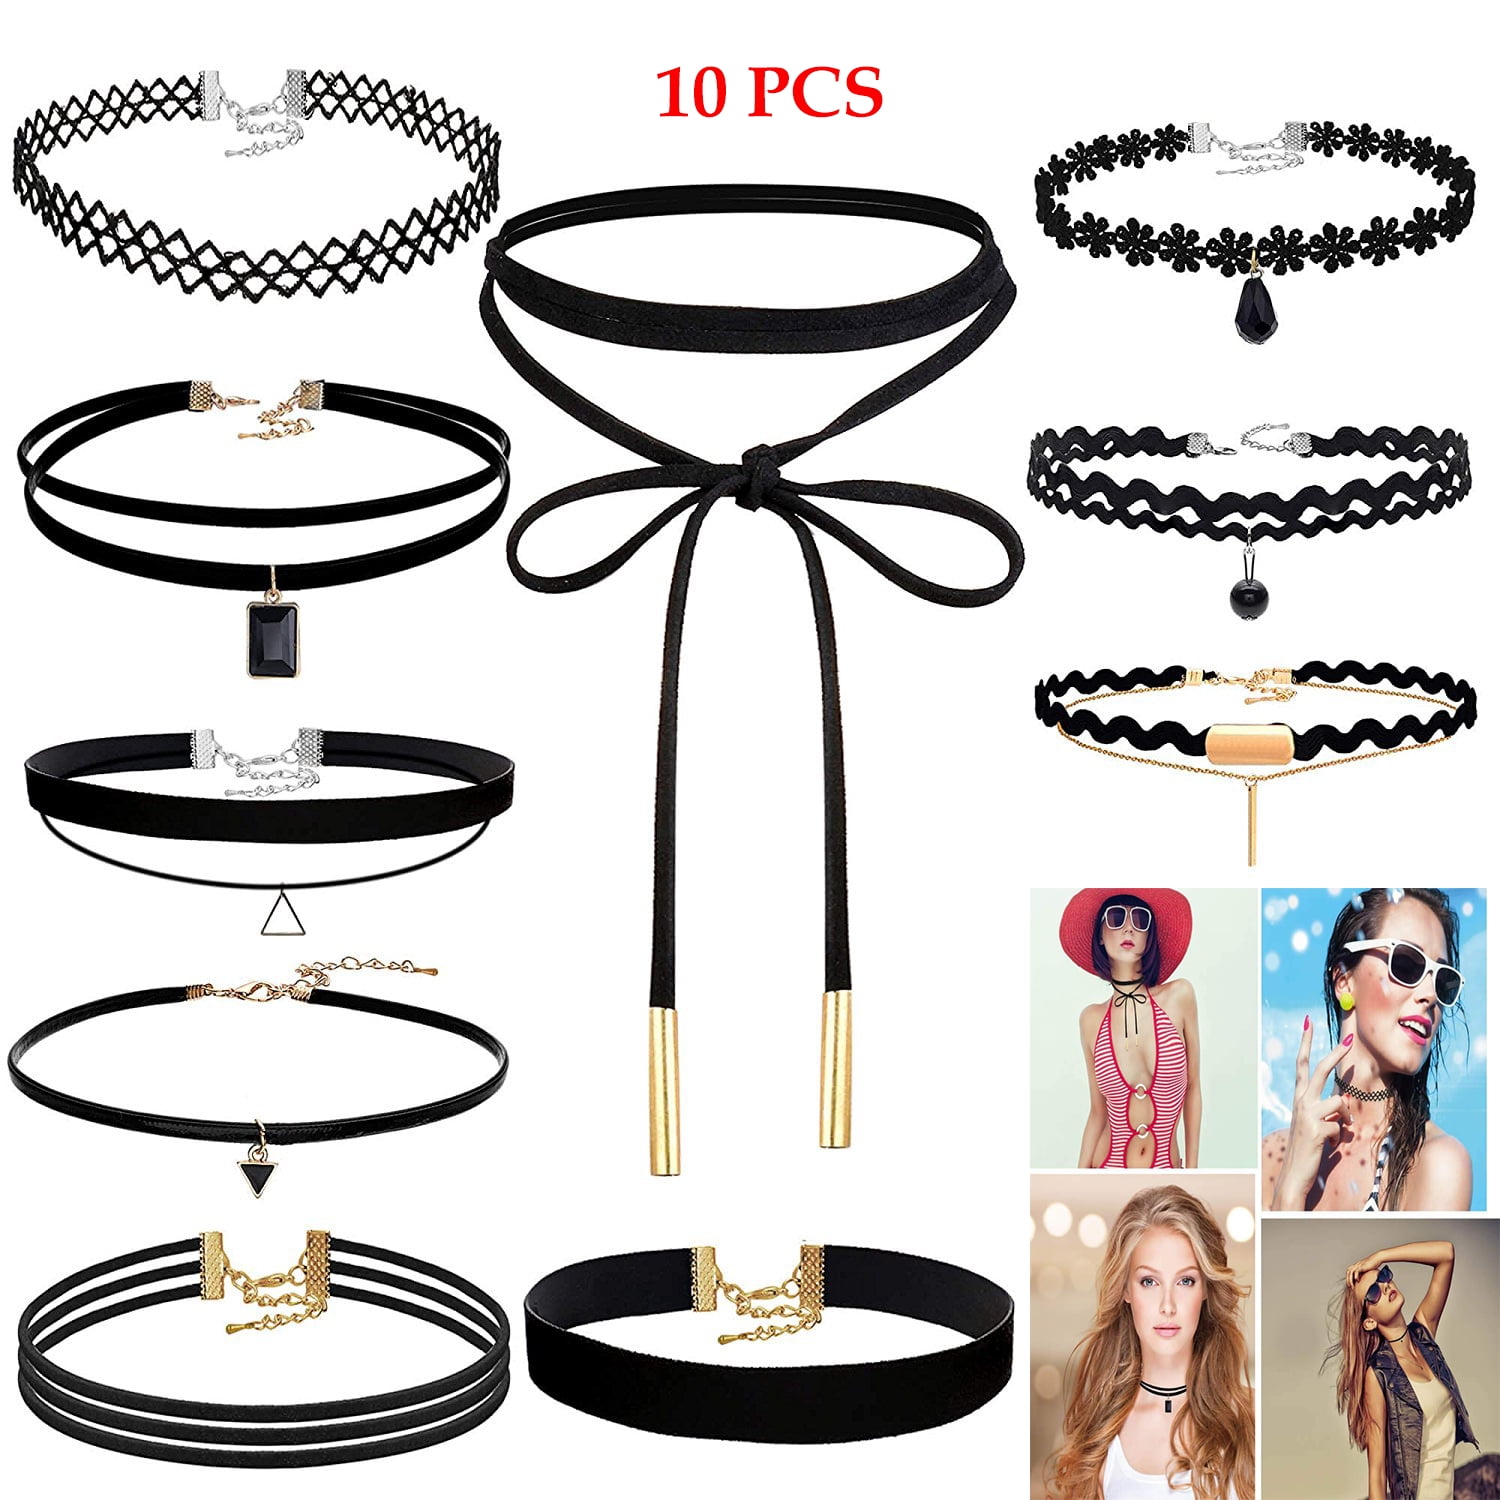 K&Q 56 Pcs Choker Necklace, Classic Colorful Gothic Collar Choker Necklace and Black Cute Lace Velvet Choker Necklace Set for Girls and Women